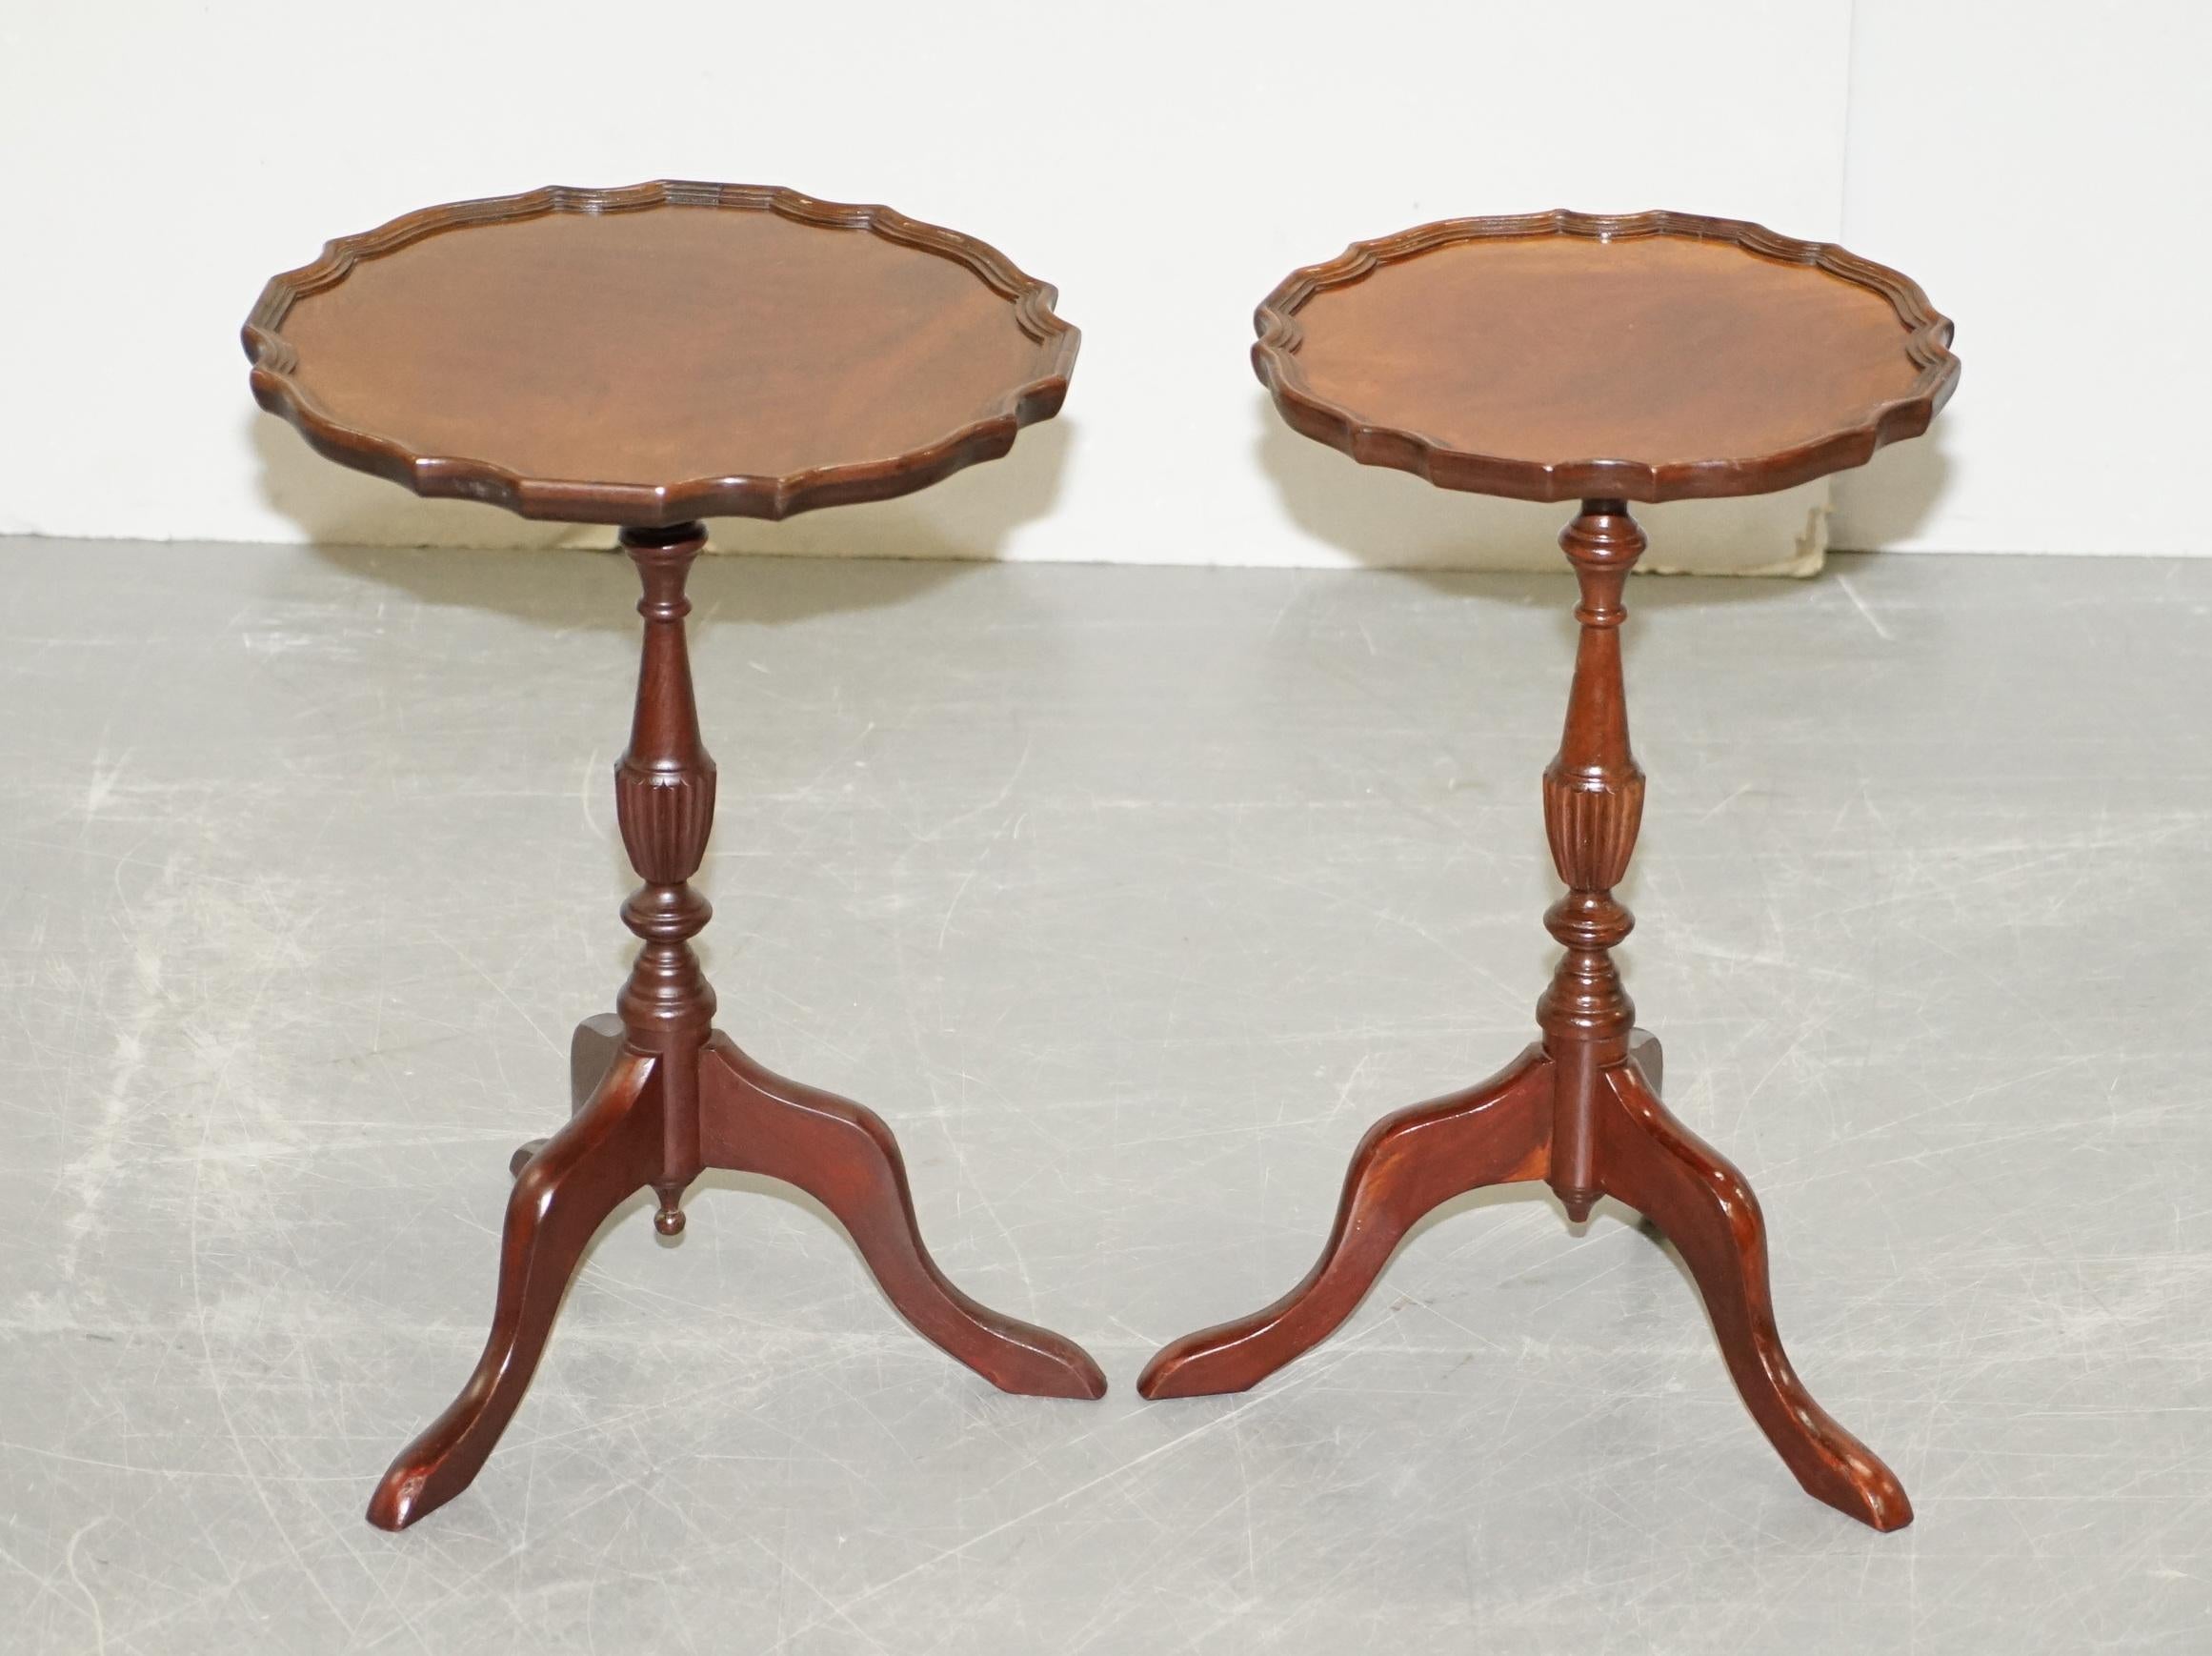 We are delighted to offer for sale this lovely pair of Bevan Funnell 